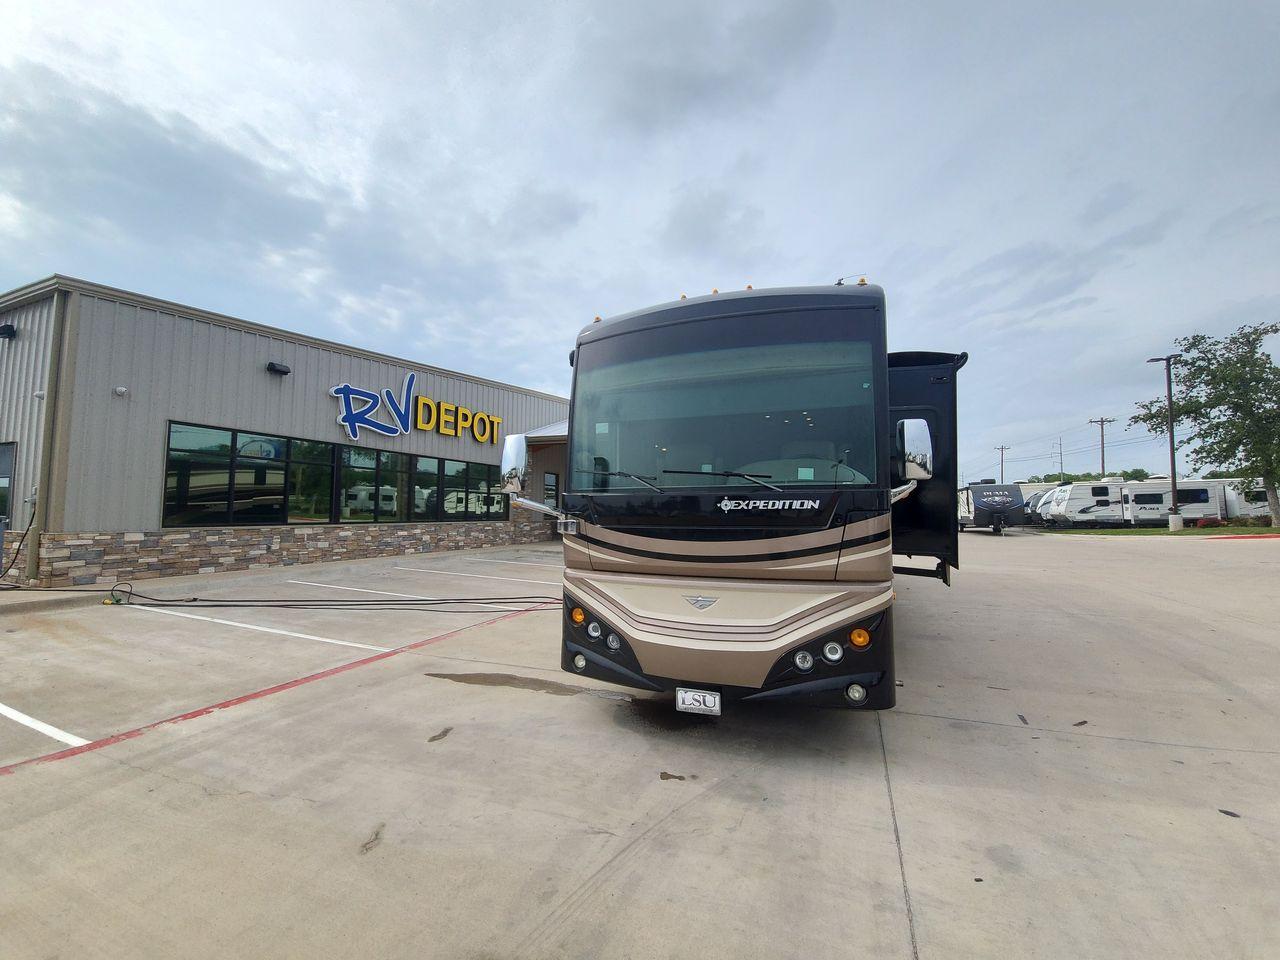 2016 BLACK DES FLEETWOOD EXPEDITION 38K (4UZACWDT2GC) , Length: 38.62 ft | Gross Weight: 32,400 lbs. | Slides: 3 transmission, located at 4319 N Main St, Cleburne, TX, 76033, (817) 678-5133, 32.385960, -97.391212 - The 2016 Fleetwood Expedition 36K motorhome runs for about 50,505 miles. The dimensions are 38.62 ft in length, 8.5 ft in width, 12.83 ft in height, 7 ft interior height, and a wheelbase of 21 ft. It has a towing capacity of 10,000 lbs and a GVWR of 32,400 lbs. There are three total slideouts and on - Photo #26